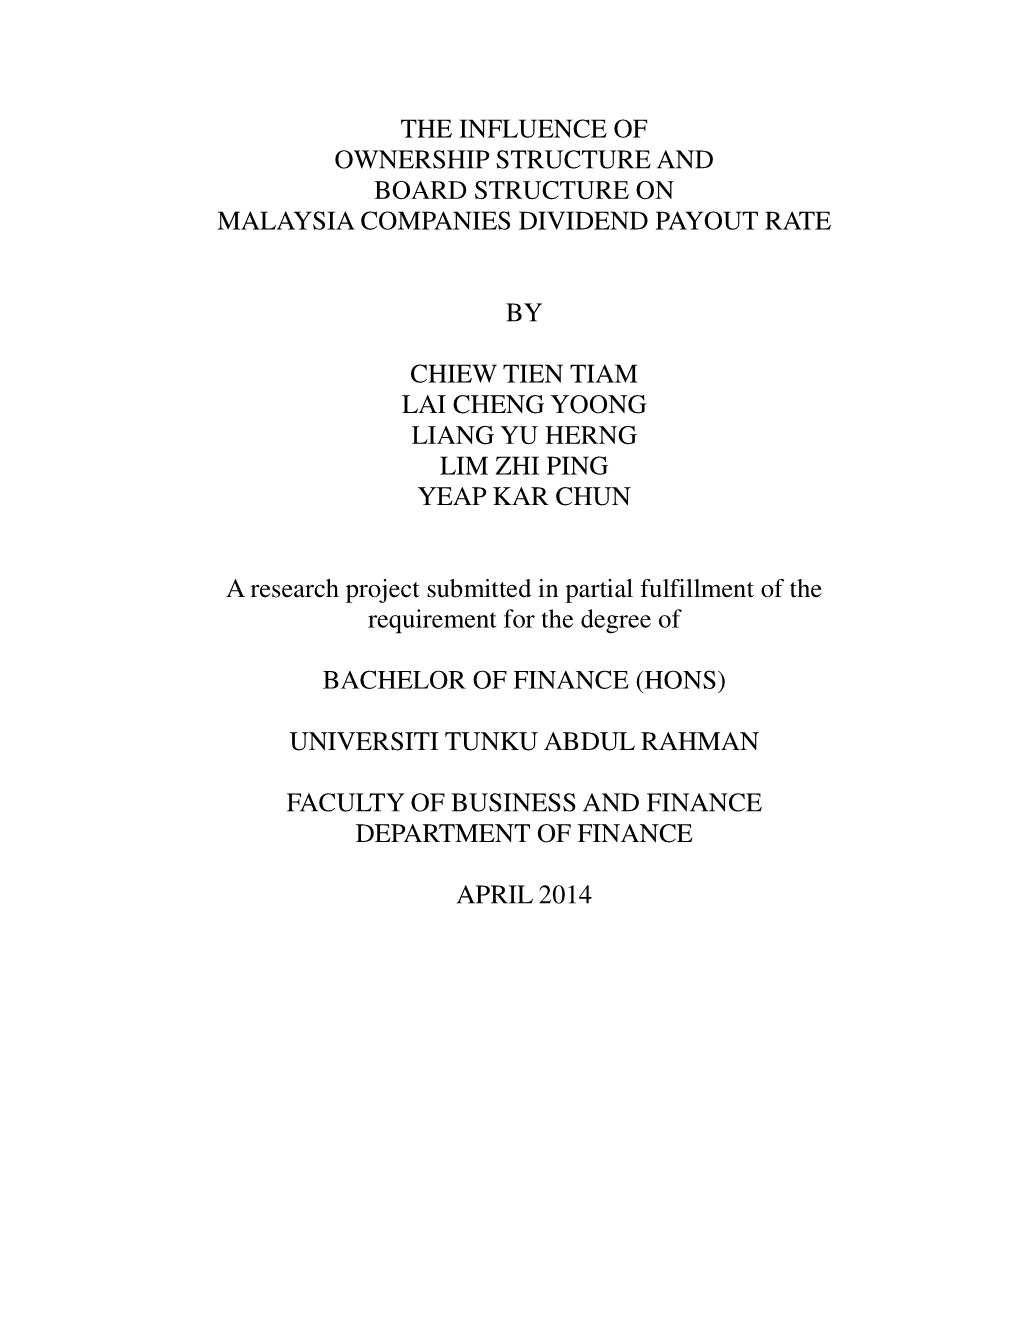 The Influence of Ownership Structure and Board Structure on Malaysia Companies Dividend Payout Rate